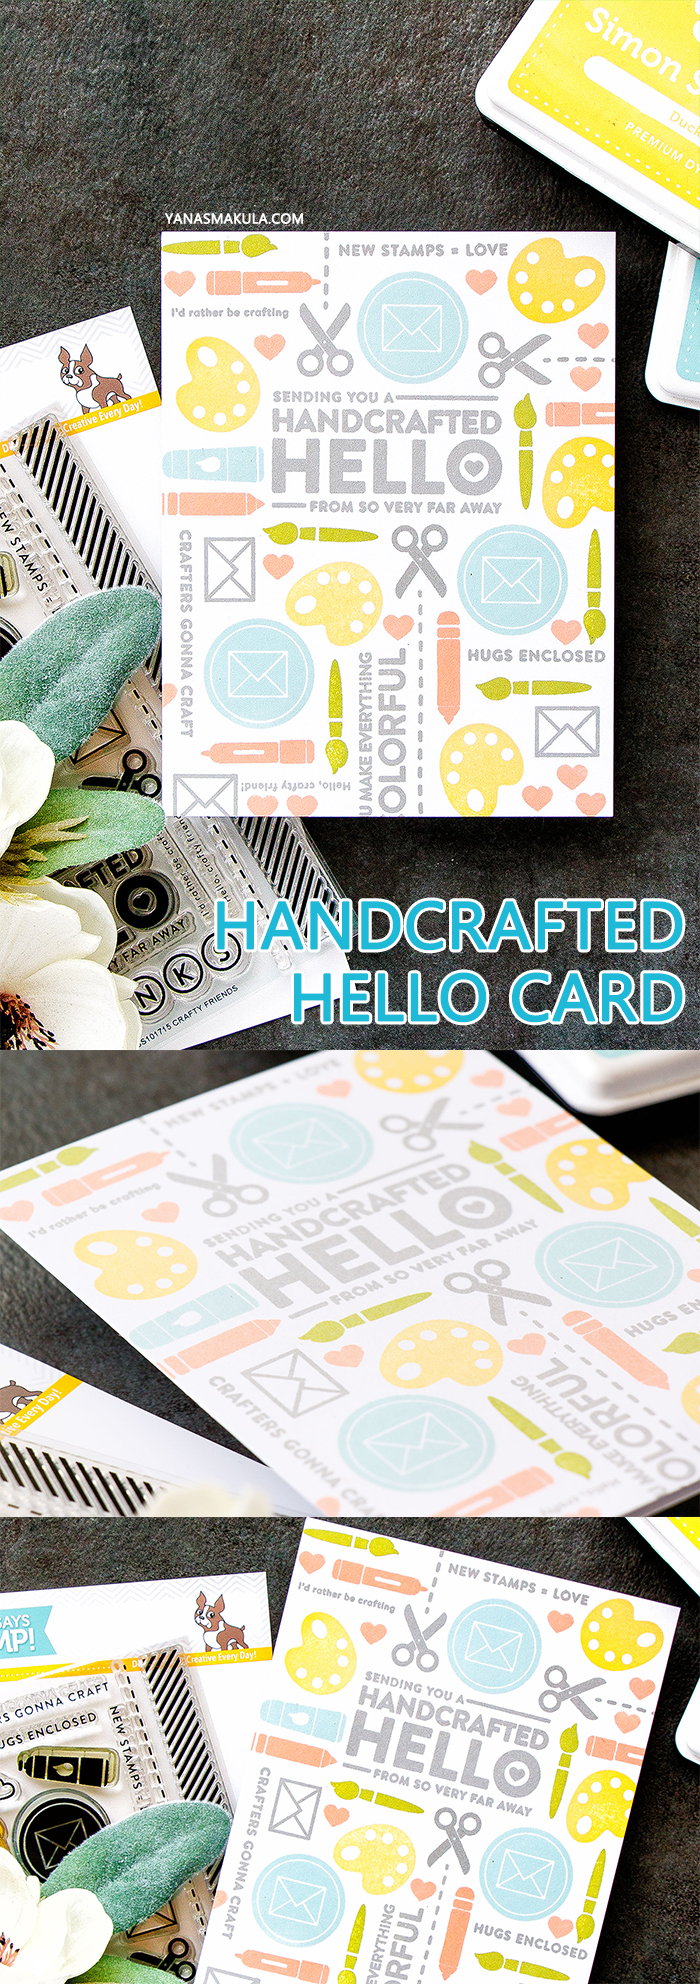 Simon Says Stamp | Crafty Friend - Handcrafter Hello Card. Pattern Stamping Basics. Video tutorial. February Card Kit #simonsaysstamp #sssck #stamping #patternstamping